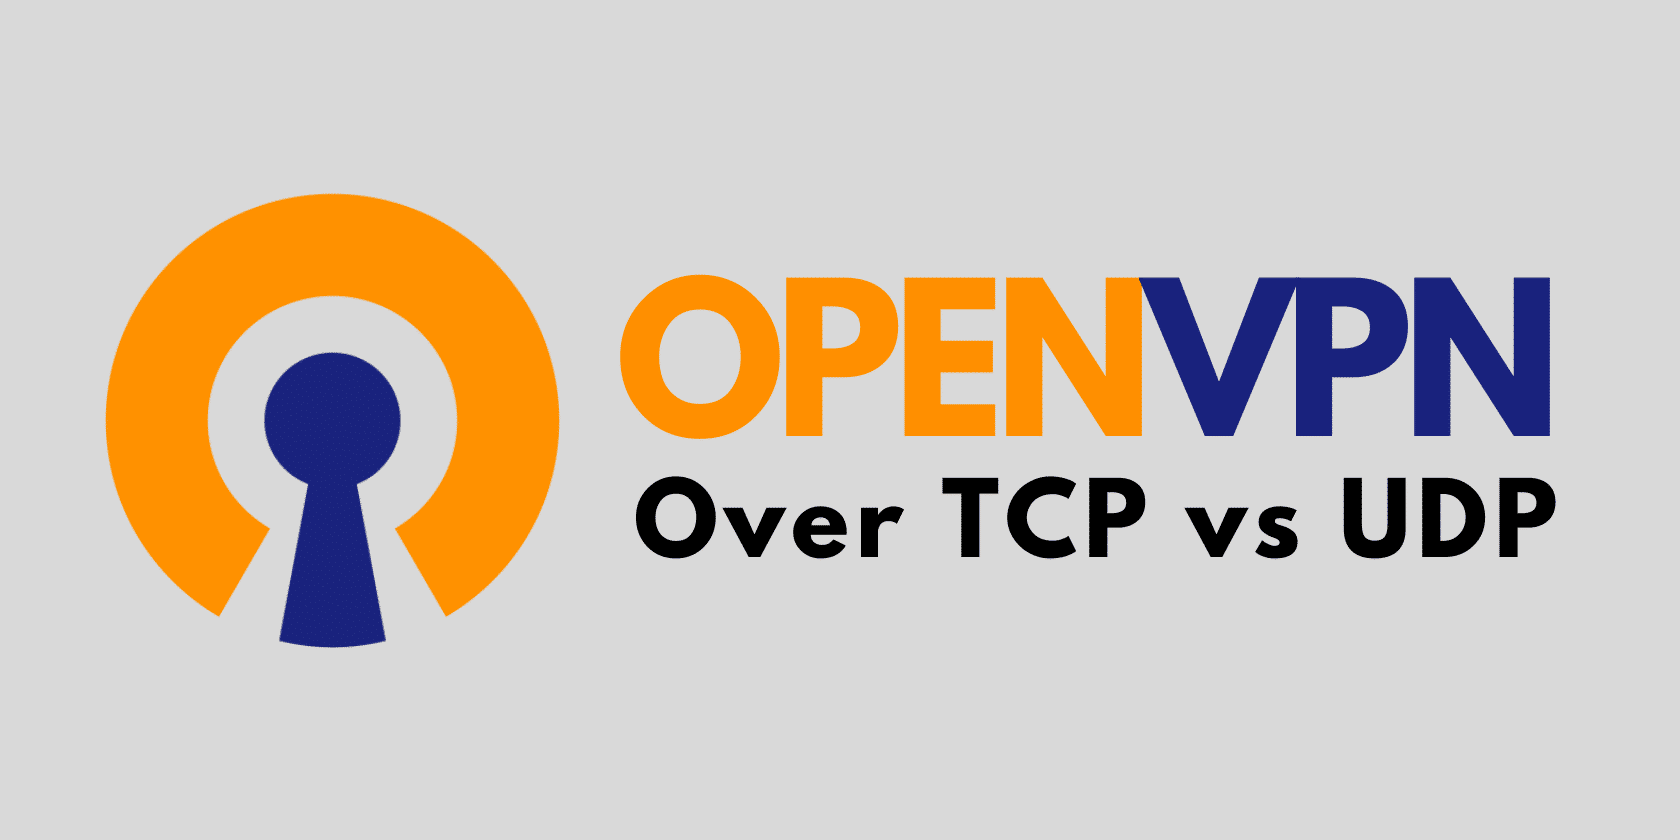 OpenVPN over TCP vs UDP: What’s the Difference, and Which Should I Choose?